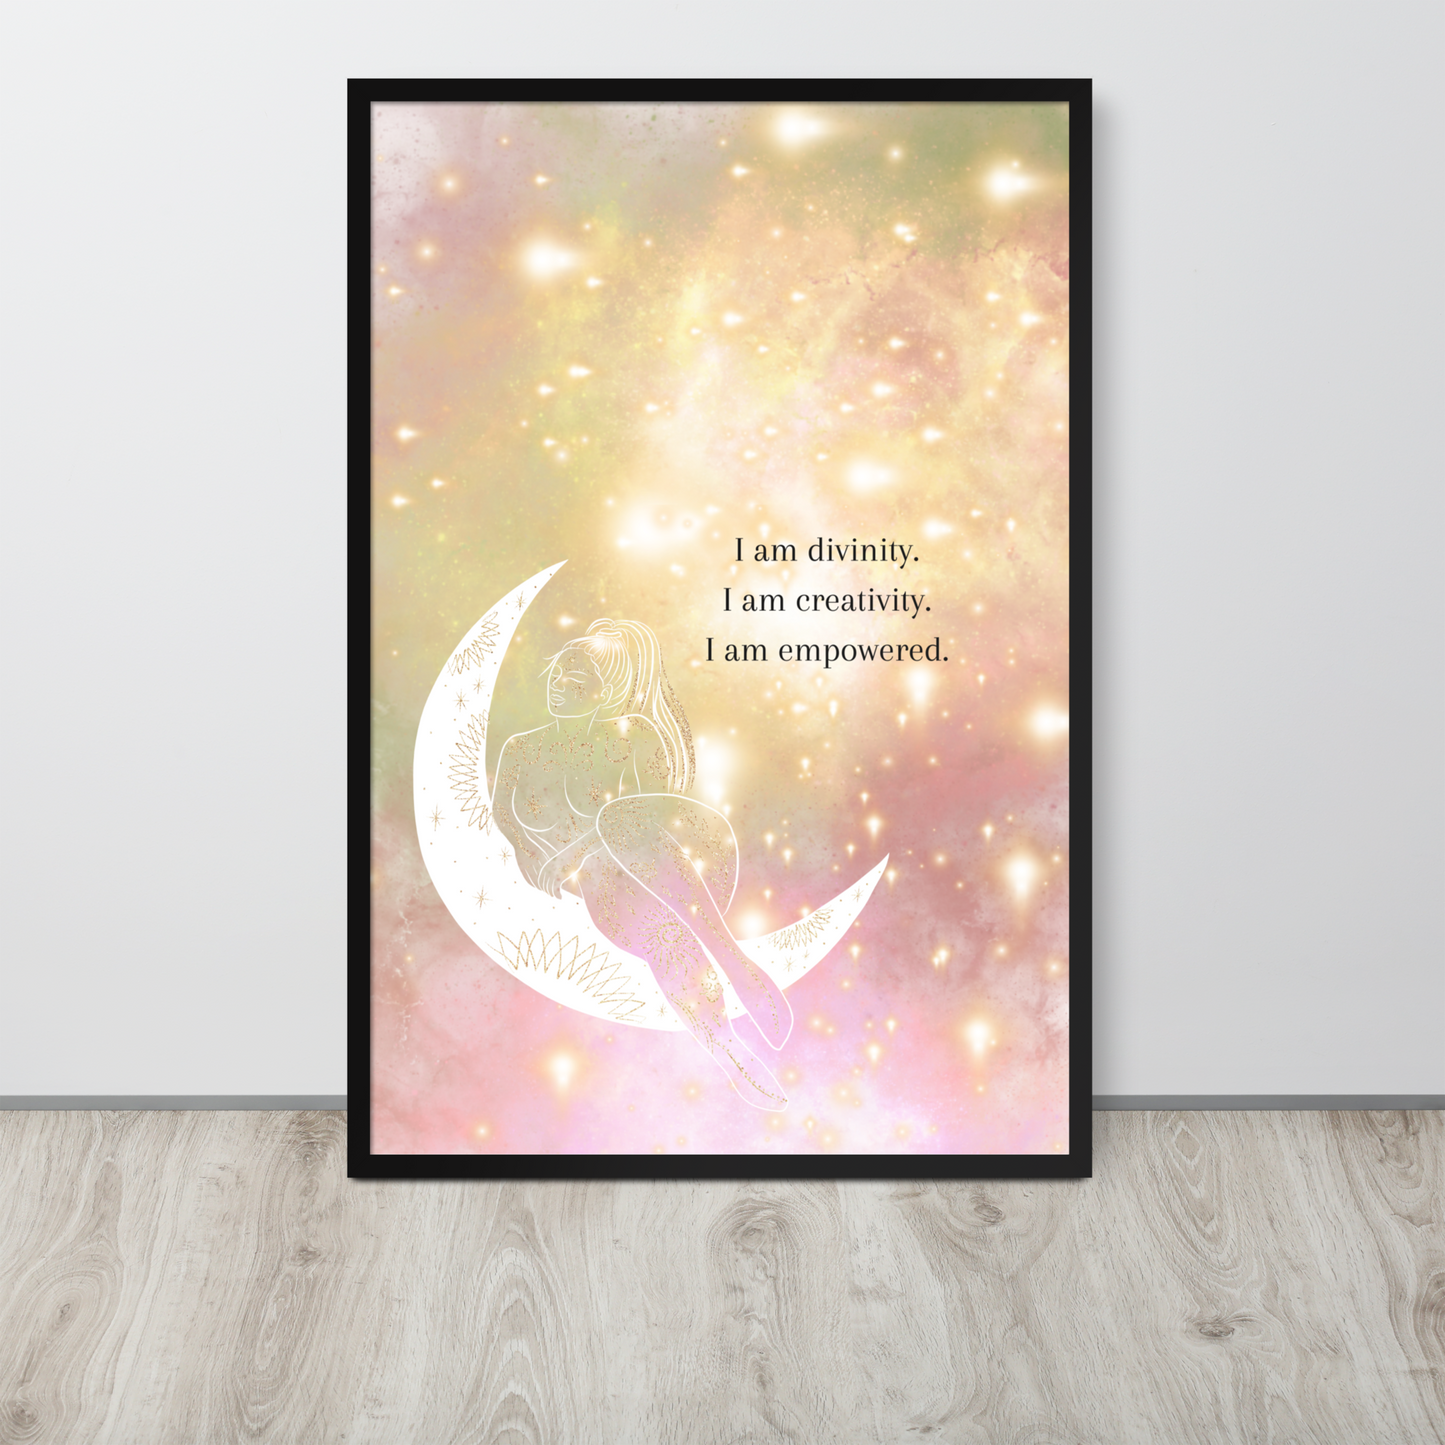 Confidence Manifestation Affirmation Printable Wall Art - Witchy Aesthetic Spiritual Decor for Self Love & Empowerment